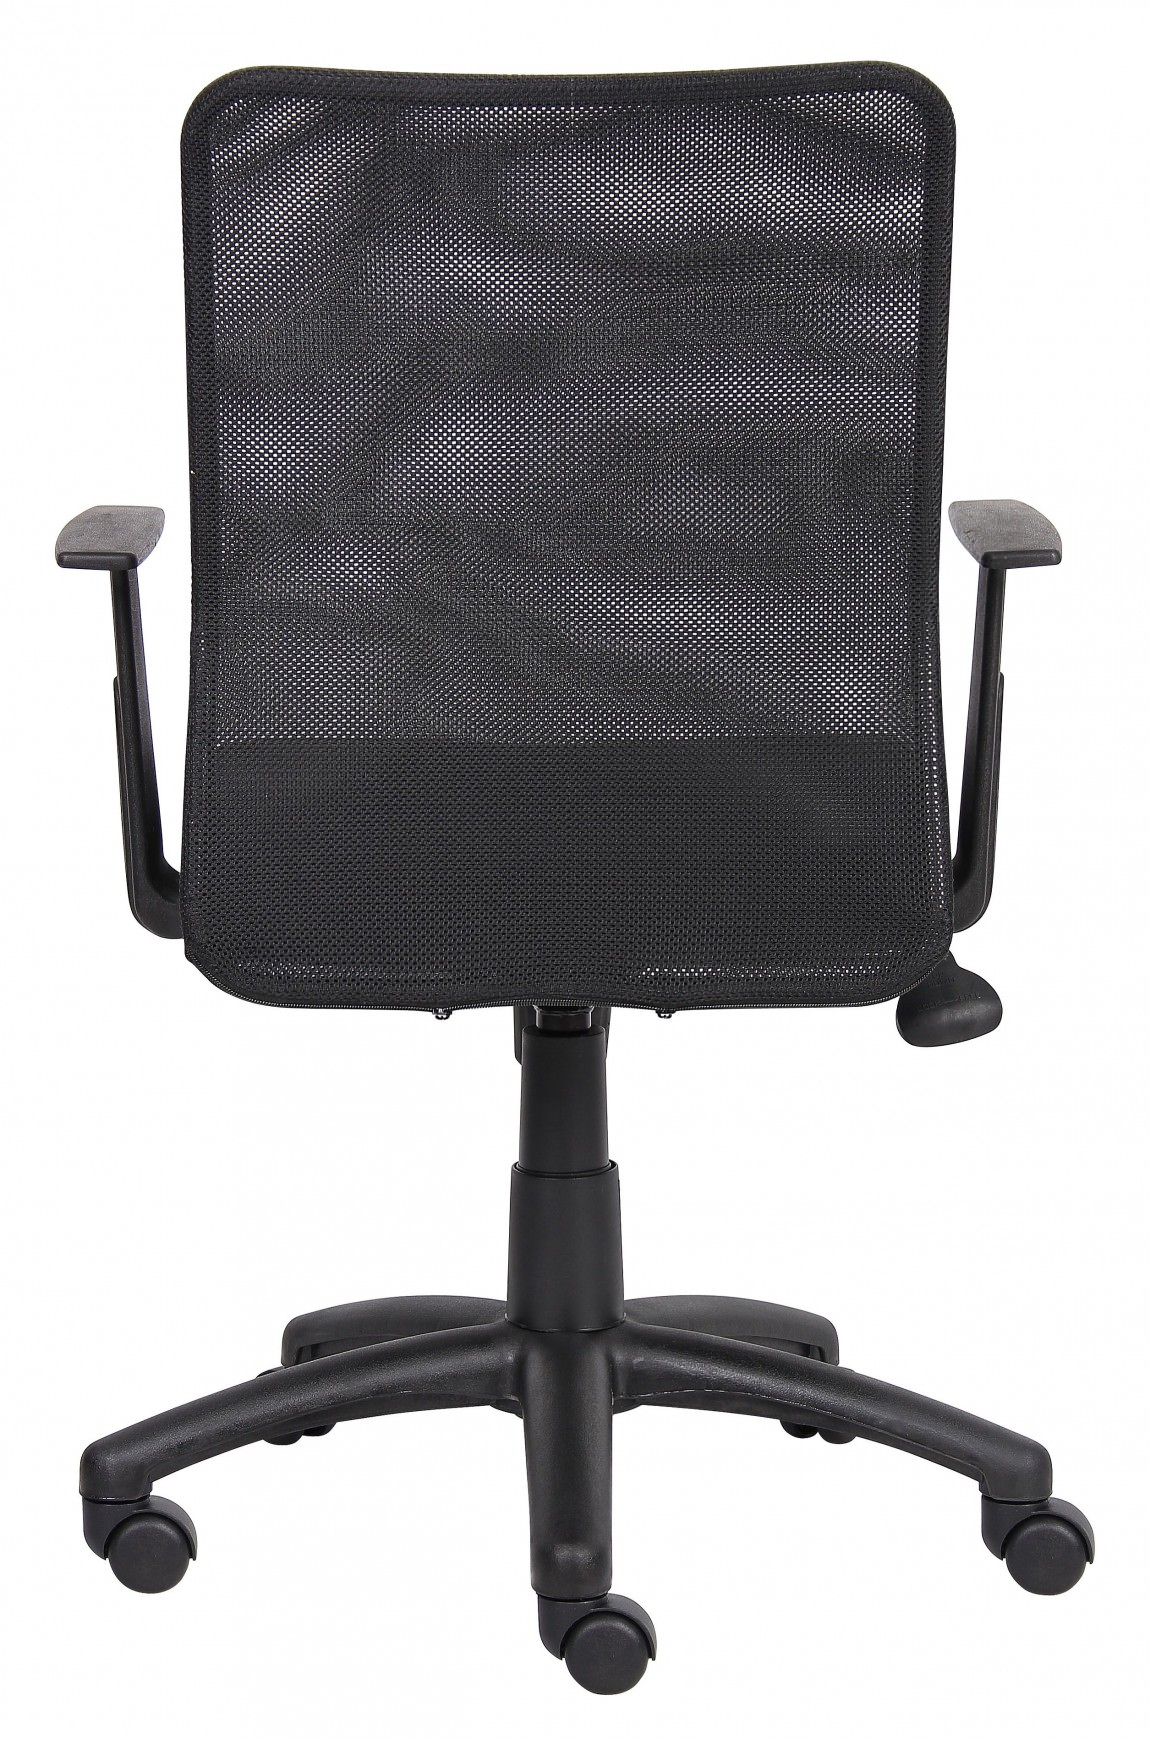 Mesh Back Office Chair with Arms